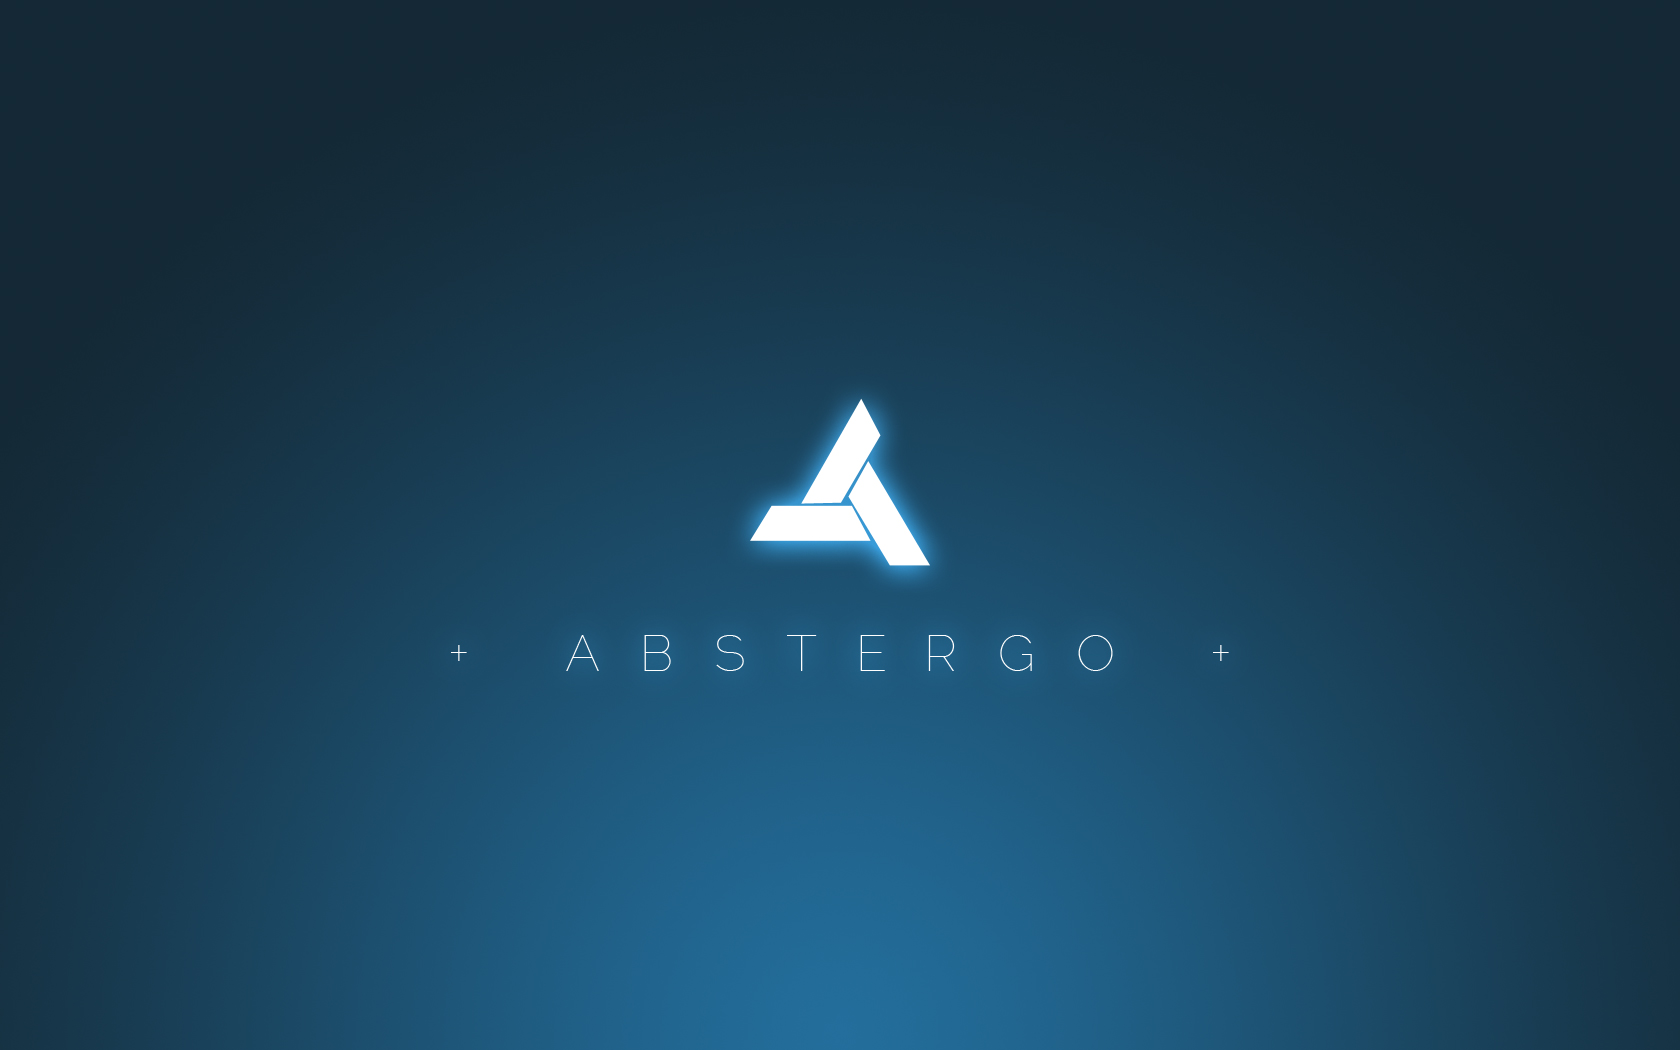 General 1680x1050 logo abstergo Assassin's Creed video games Ubisoft